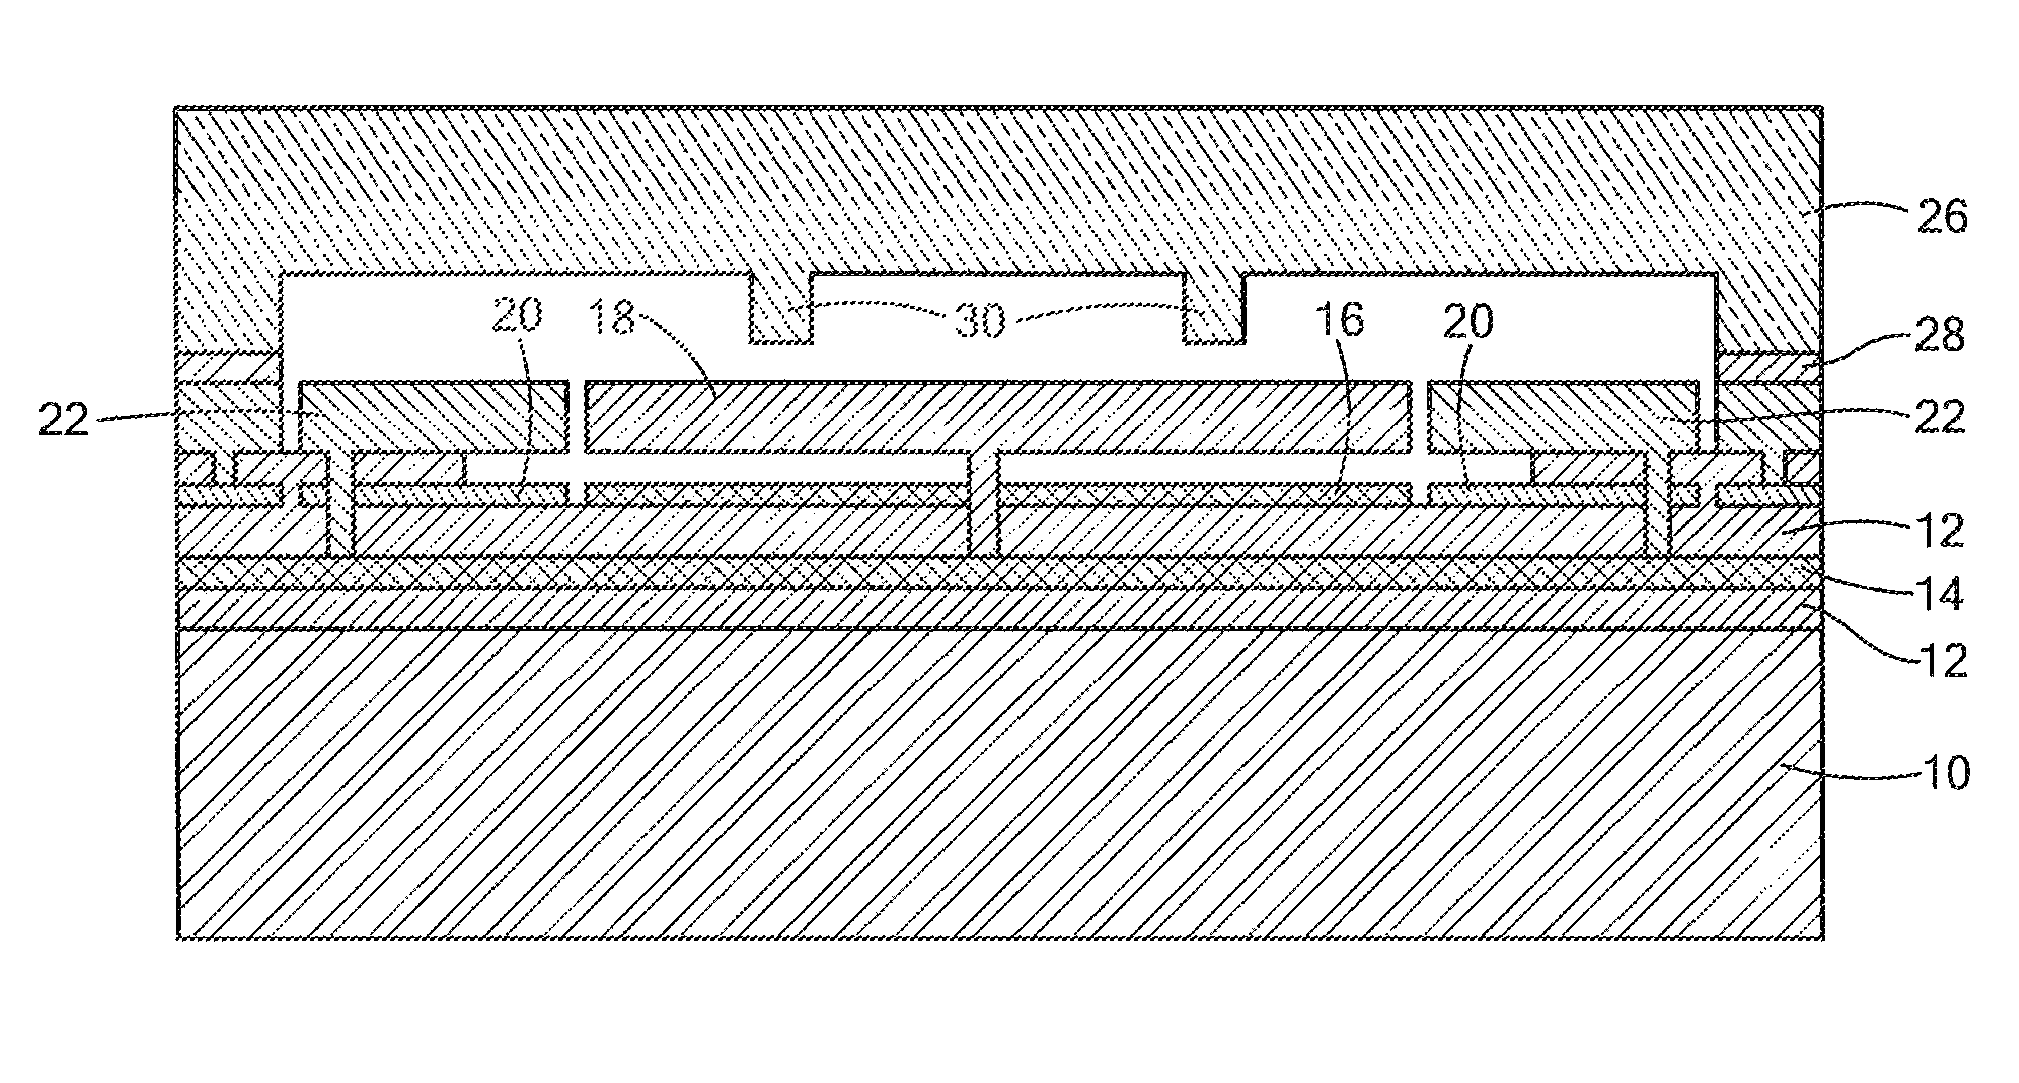 MEMS sensor with movable z-axis sensing element